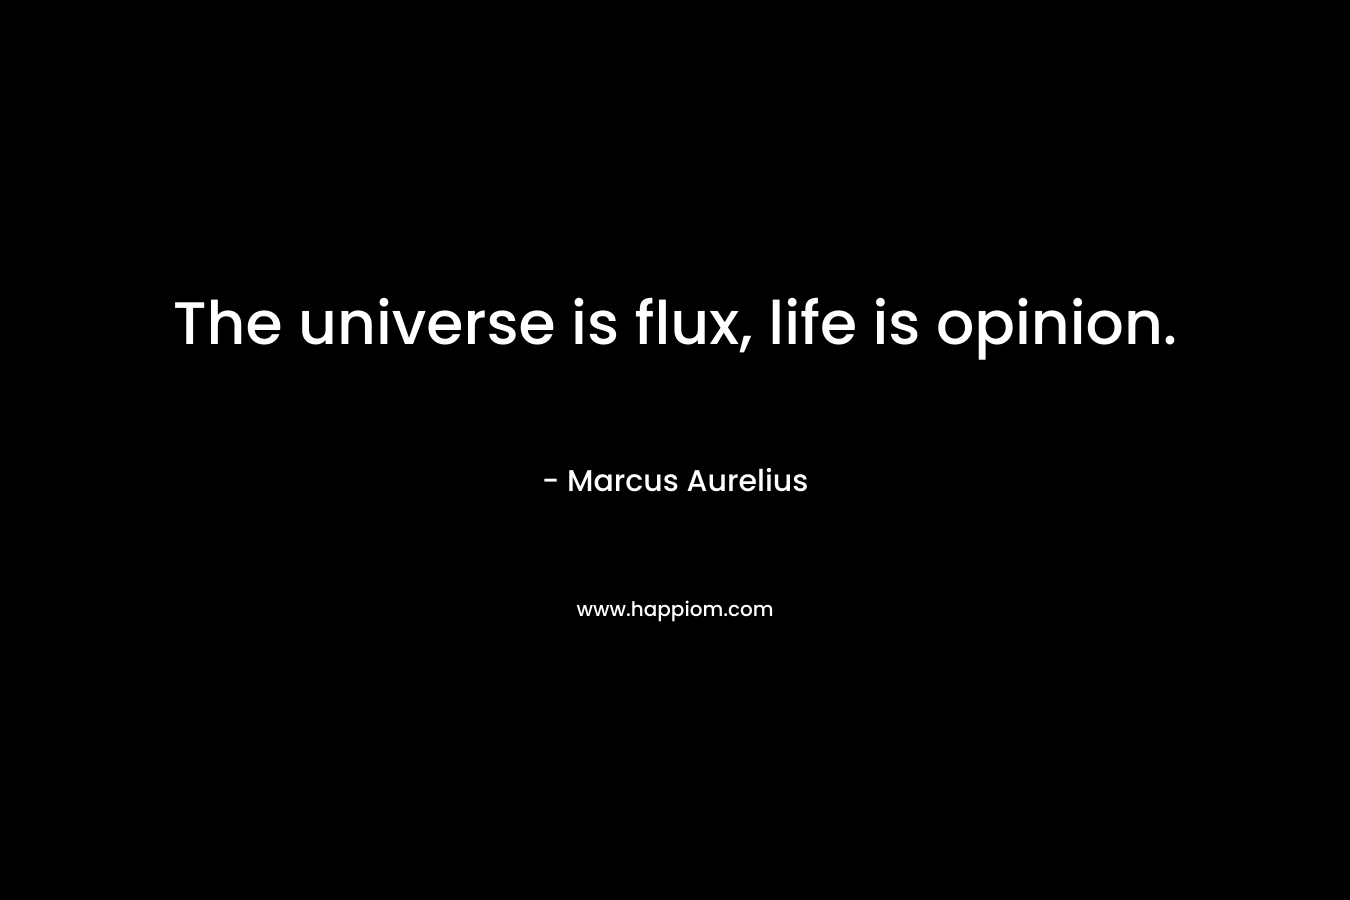 The universe is flux, life is opinion.